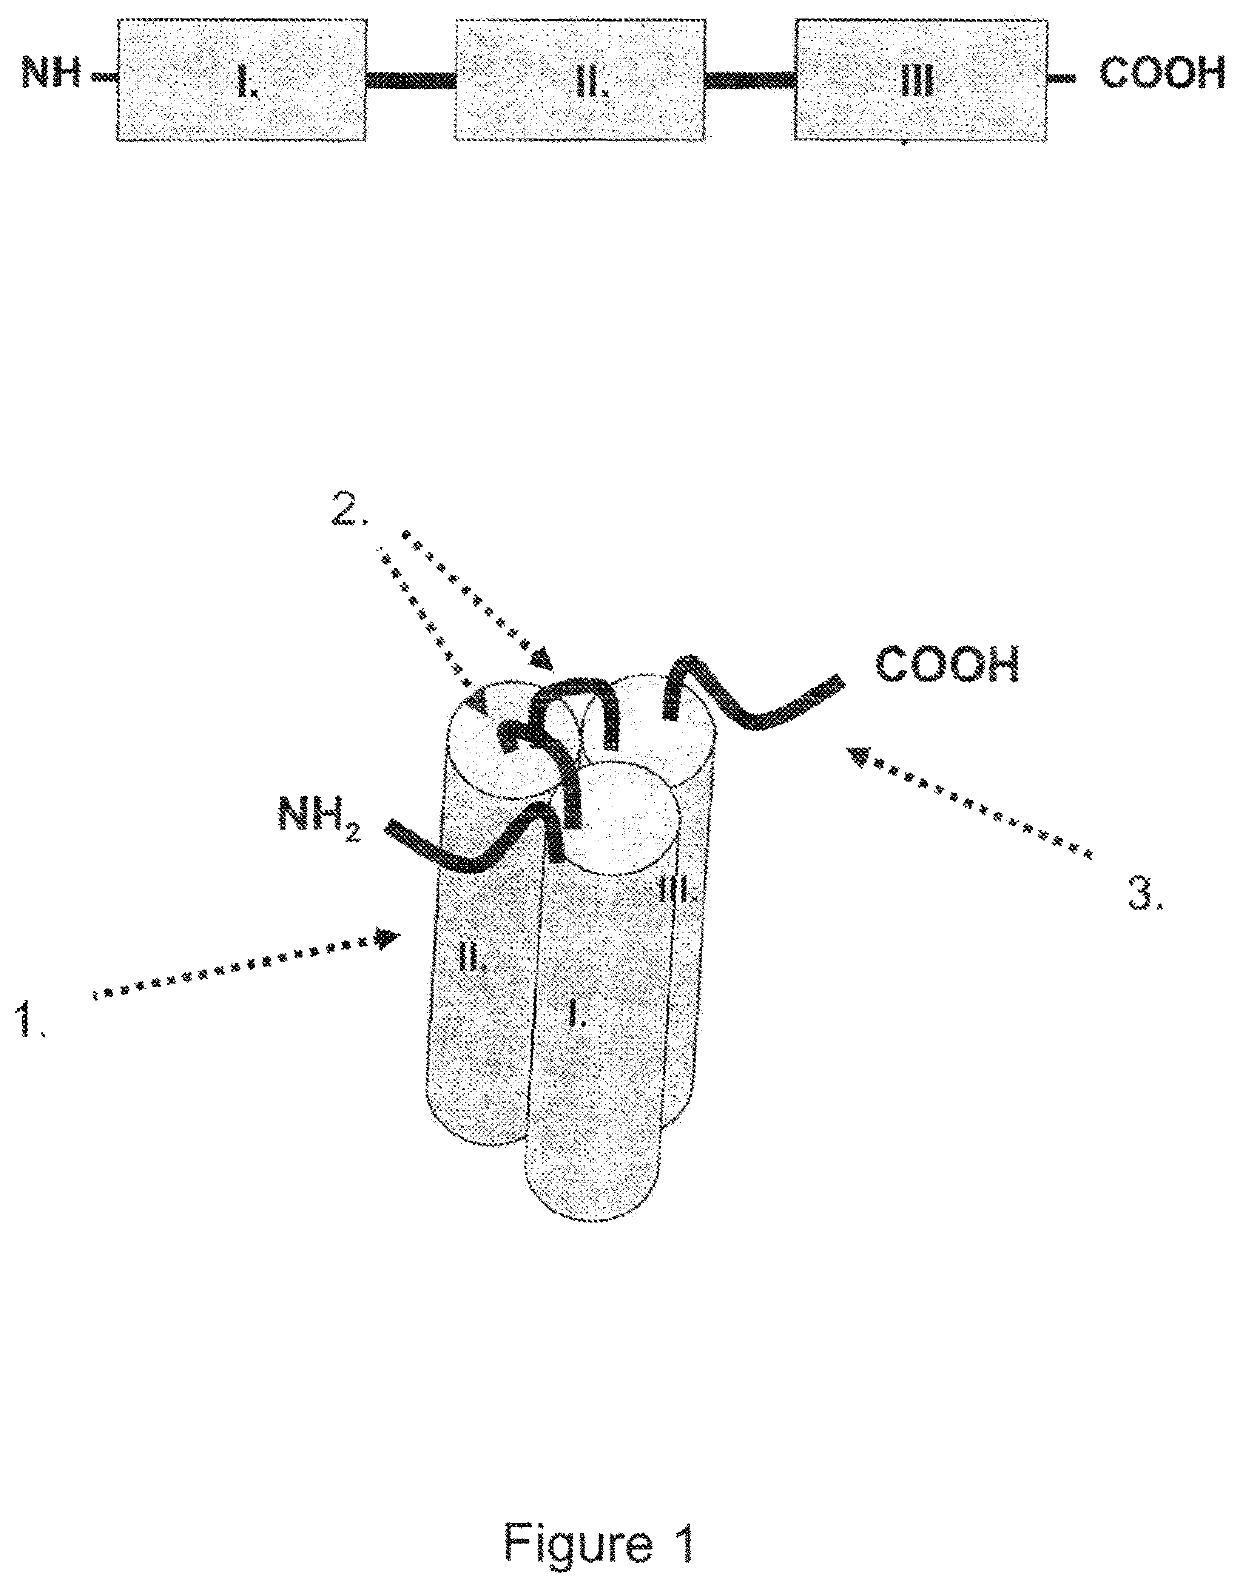 Single-chain light receptor agonist proteins